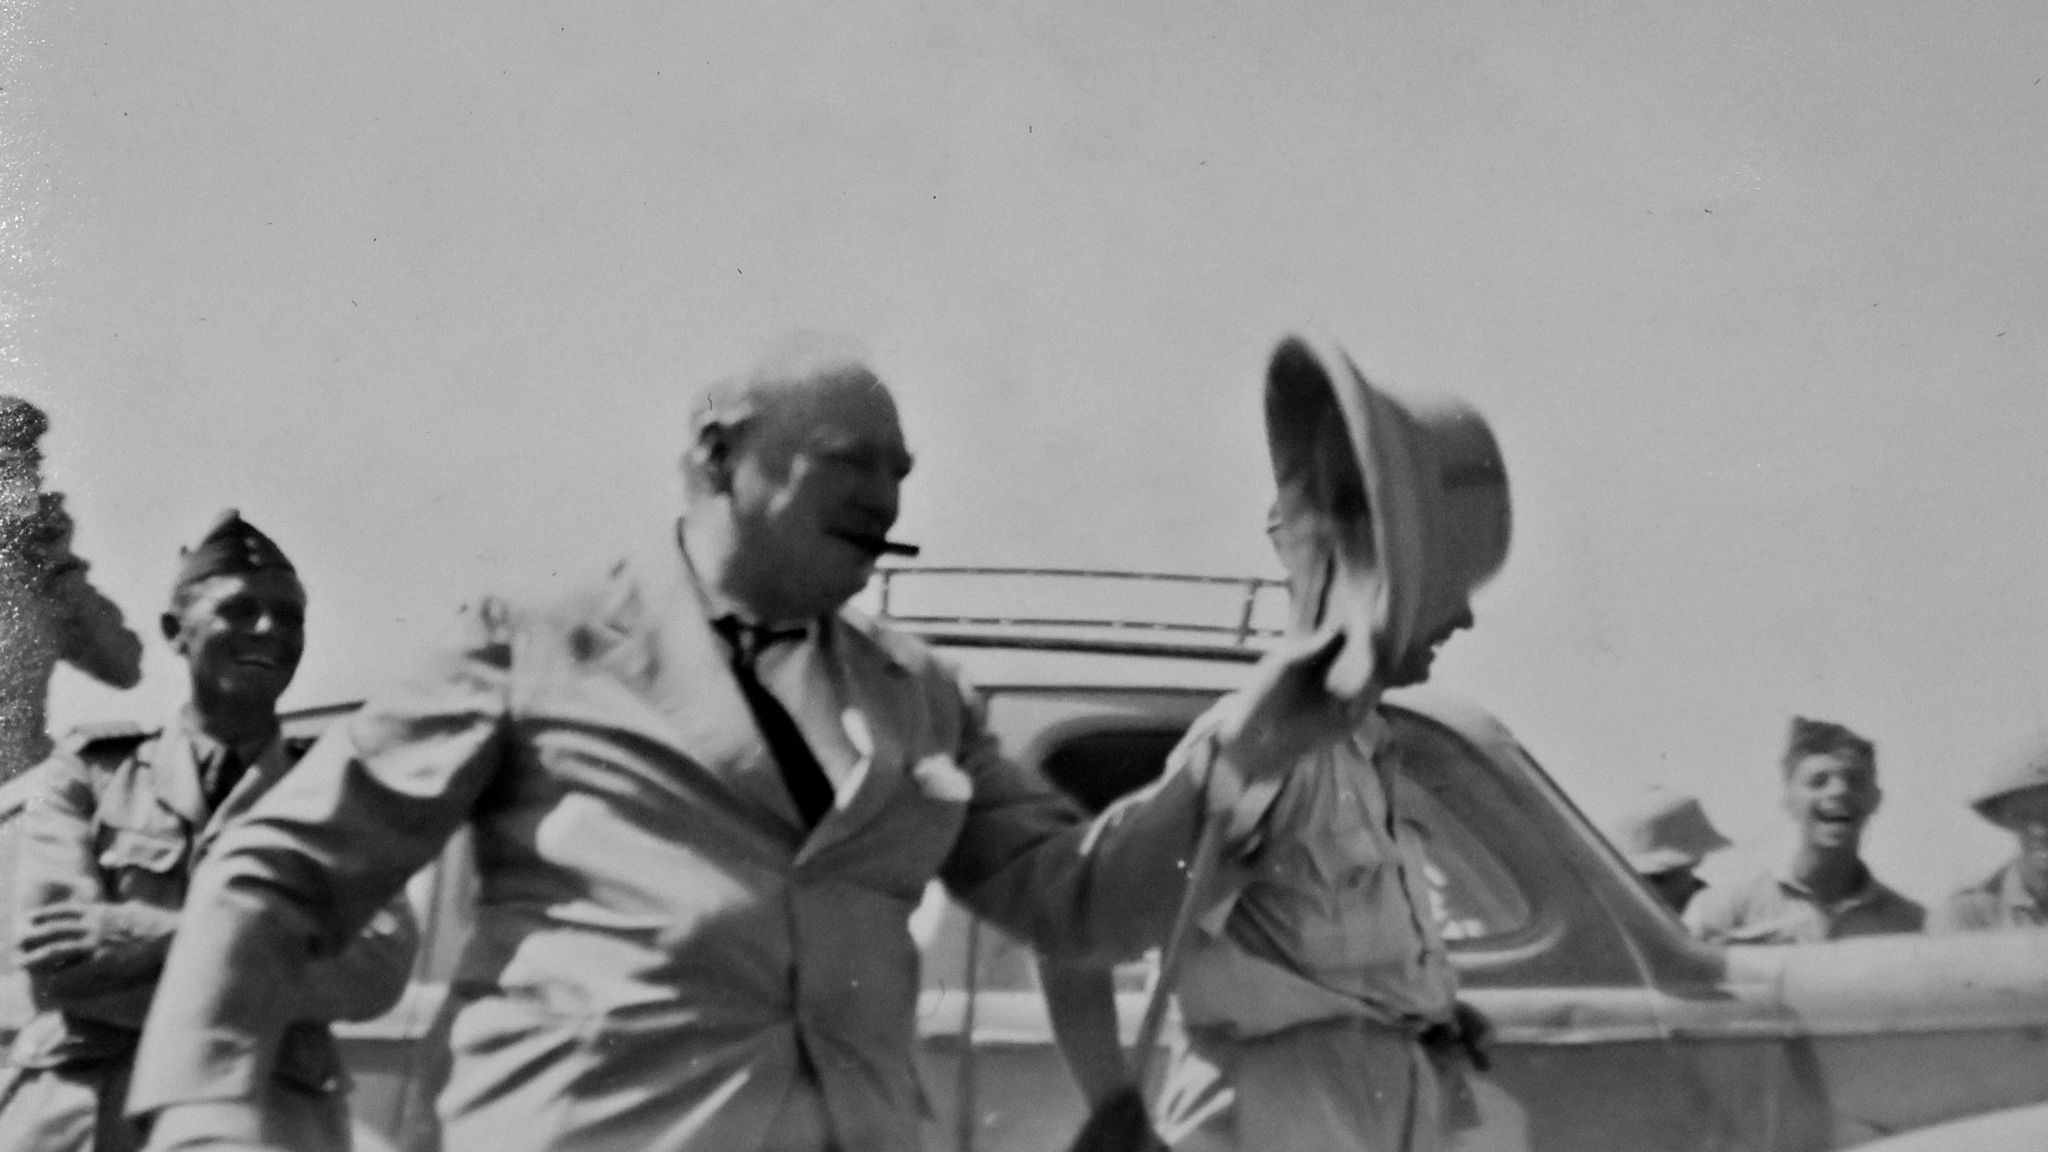 An old photograph of Sir Winston Churchill with a cigar in his mouth waving his hat as he visits troops